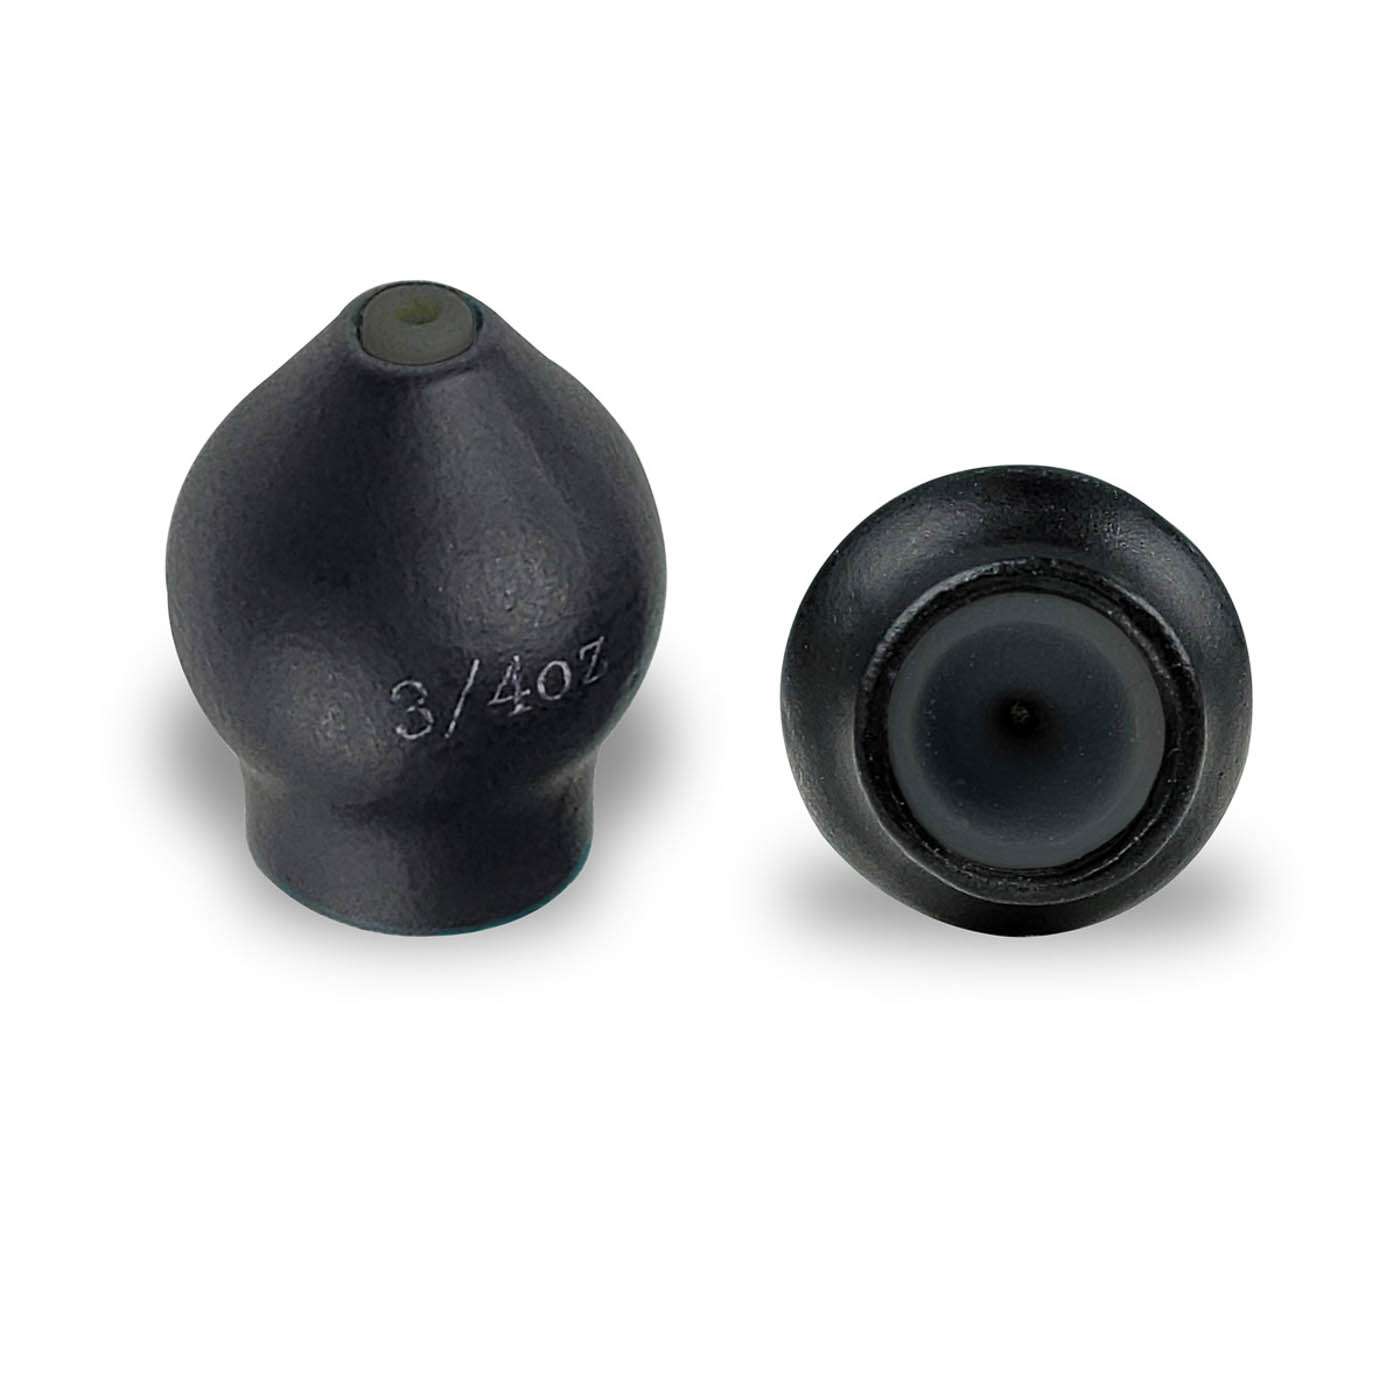 <p><strong>G-Shield Tungsten Punch Weight</strong></p><p>The G-Shield Tungsten Punch Weight features a specially designed composite insert that not only protects an anglerâs line, but also provides 360-degree protection for the knot. The insert is wider at the base than at the insertion hole so the hook can recess itself into the weight, creating a more compact, lifelike and snag resistant offering. The punch weight will penetrate thick overhead canopies that resist other shapes. Itâs bulbous at the front, creating a weight-forward design that builds inertia when it first contacts likely bass-holding cover and features a stealthy, chip-proof black matte finish. For easy identification the weight size is stamped into the side of each weight. $11.11 - $20.97. <a href=